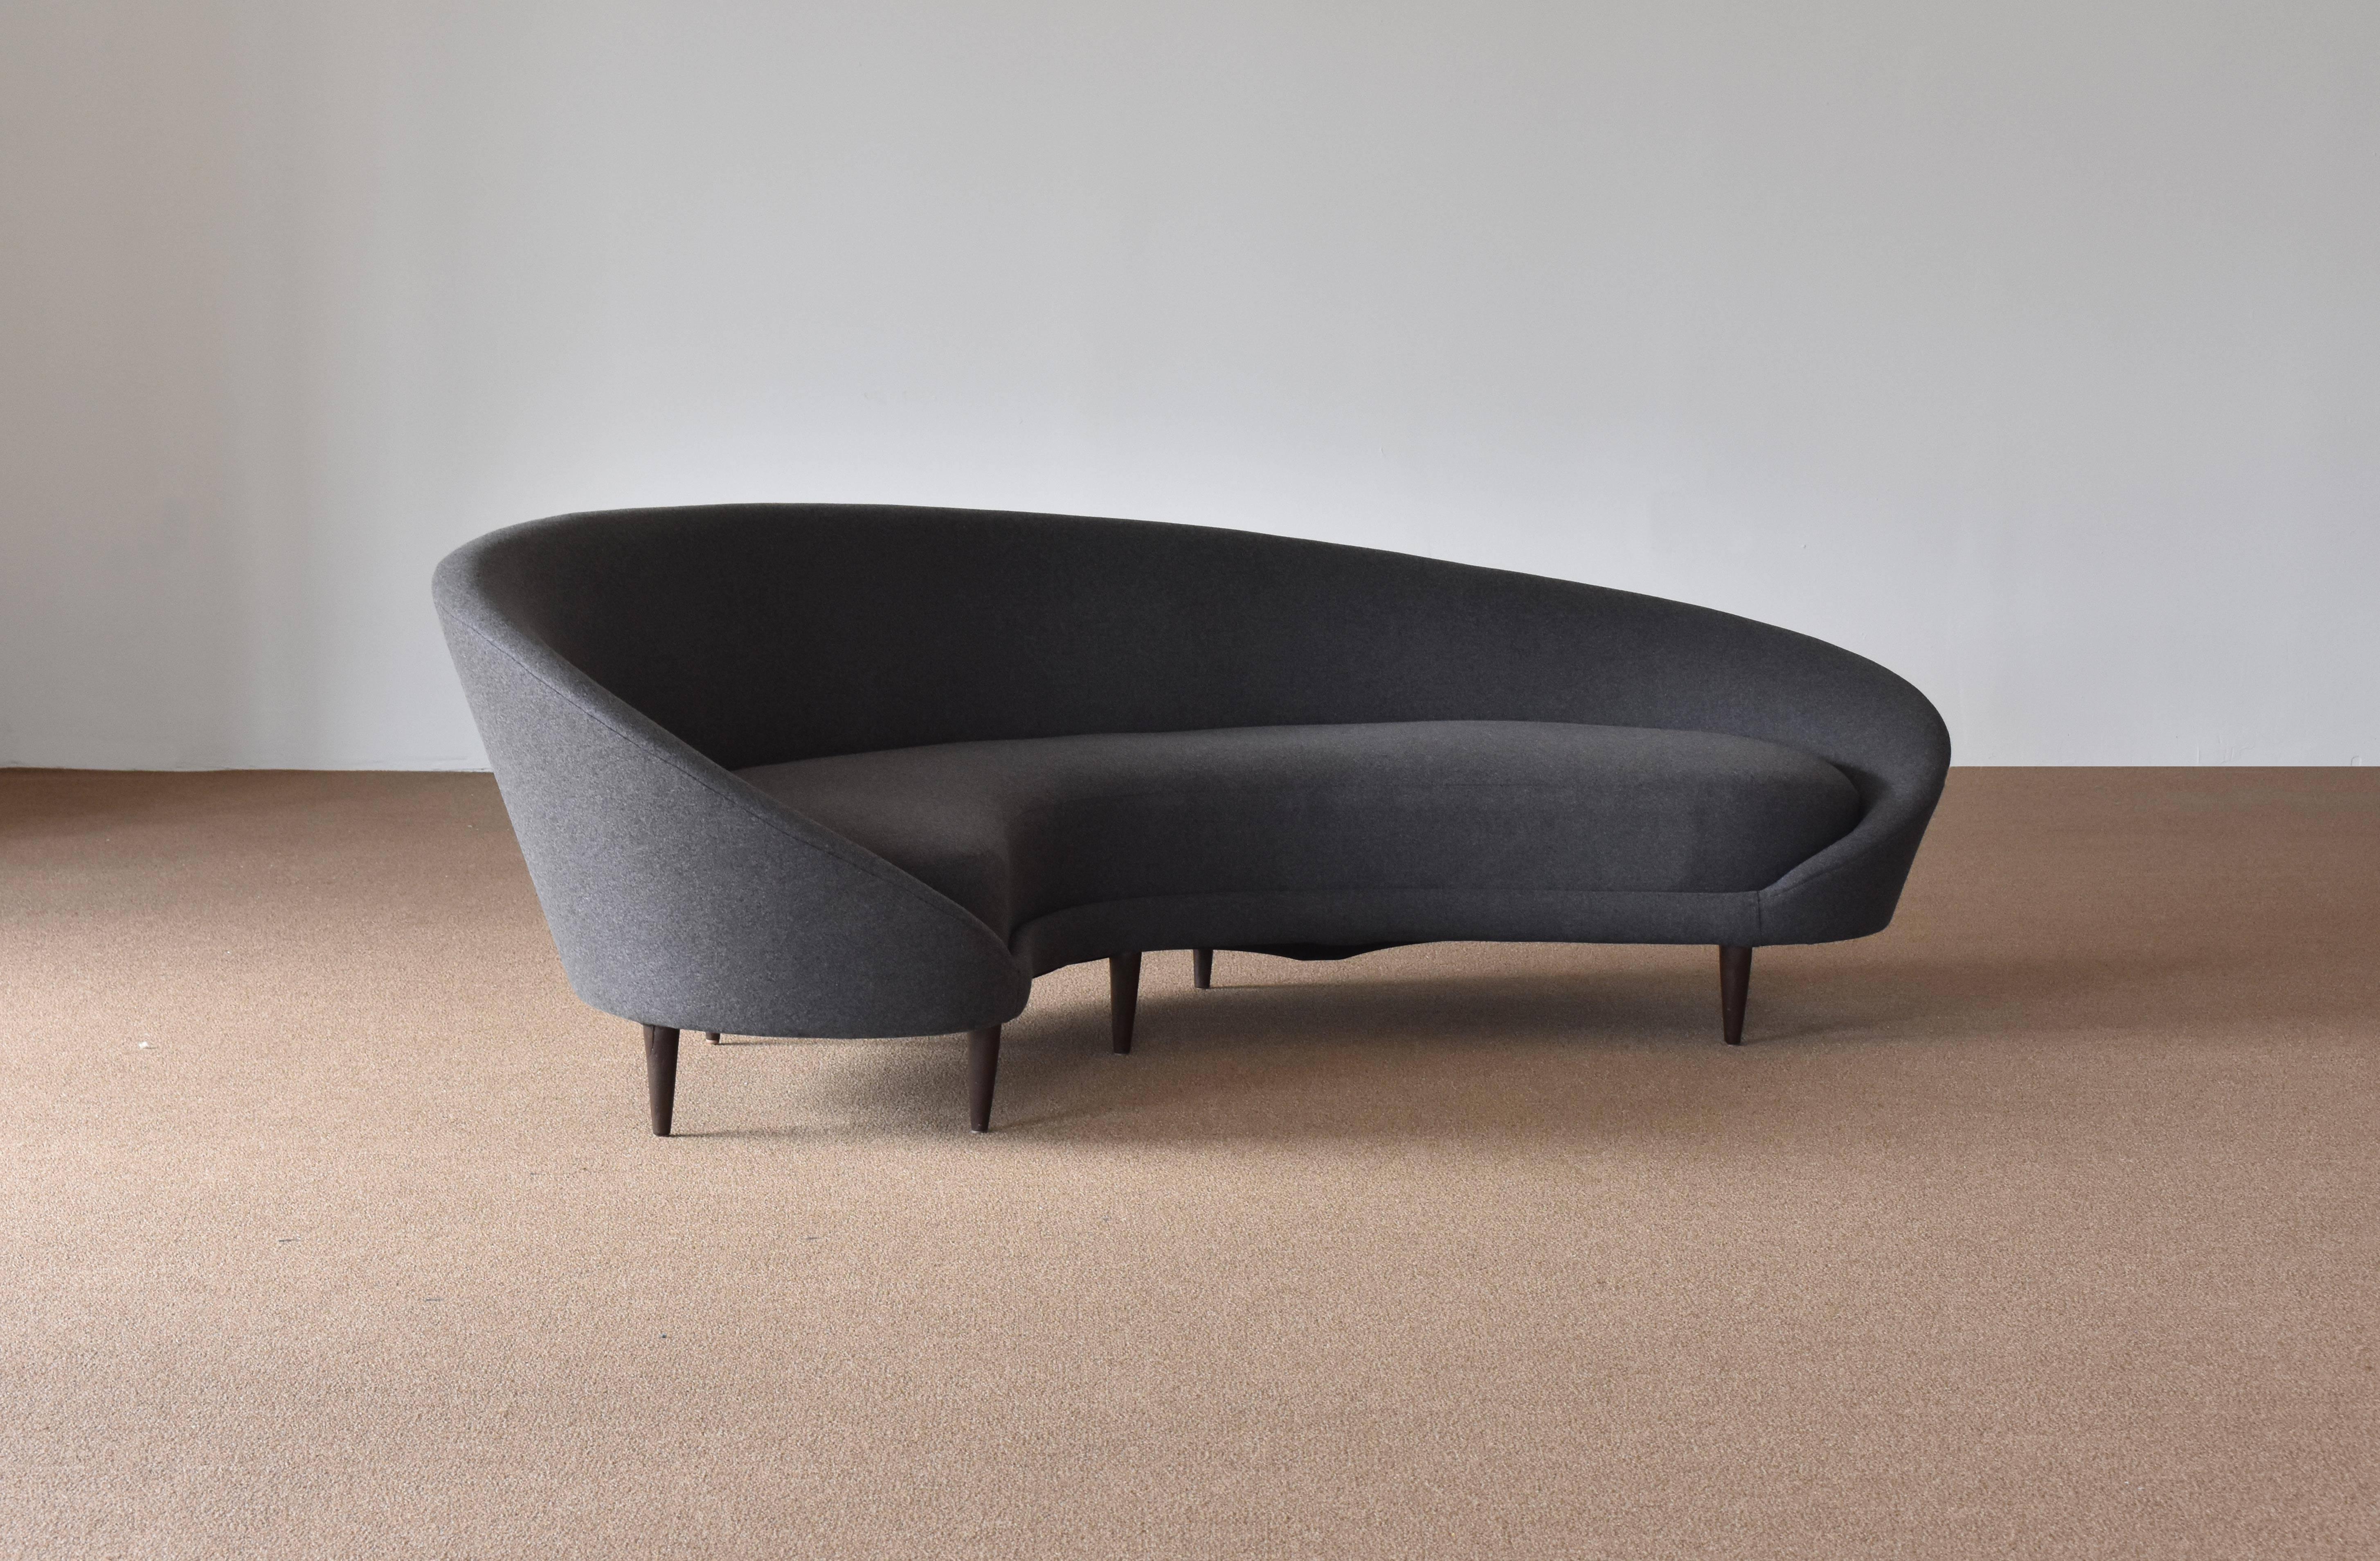 A curved / organic sofa by Federico Munari. Upholstered in a brand new medium dark grey wool fabric. Stained oak legs. The present sofa is an authentic example of this design from the 1950s sourced directly from Italy. Pre-restoration images